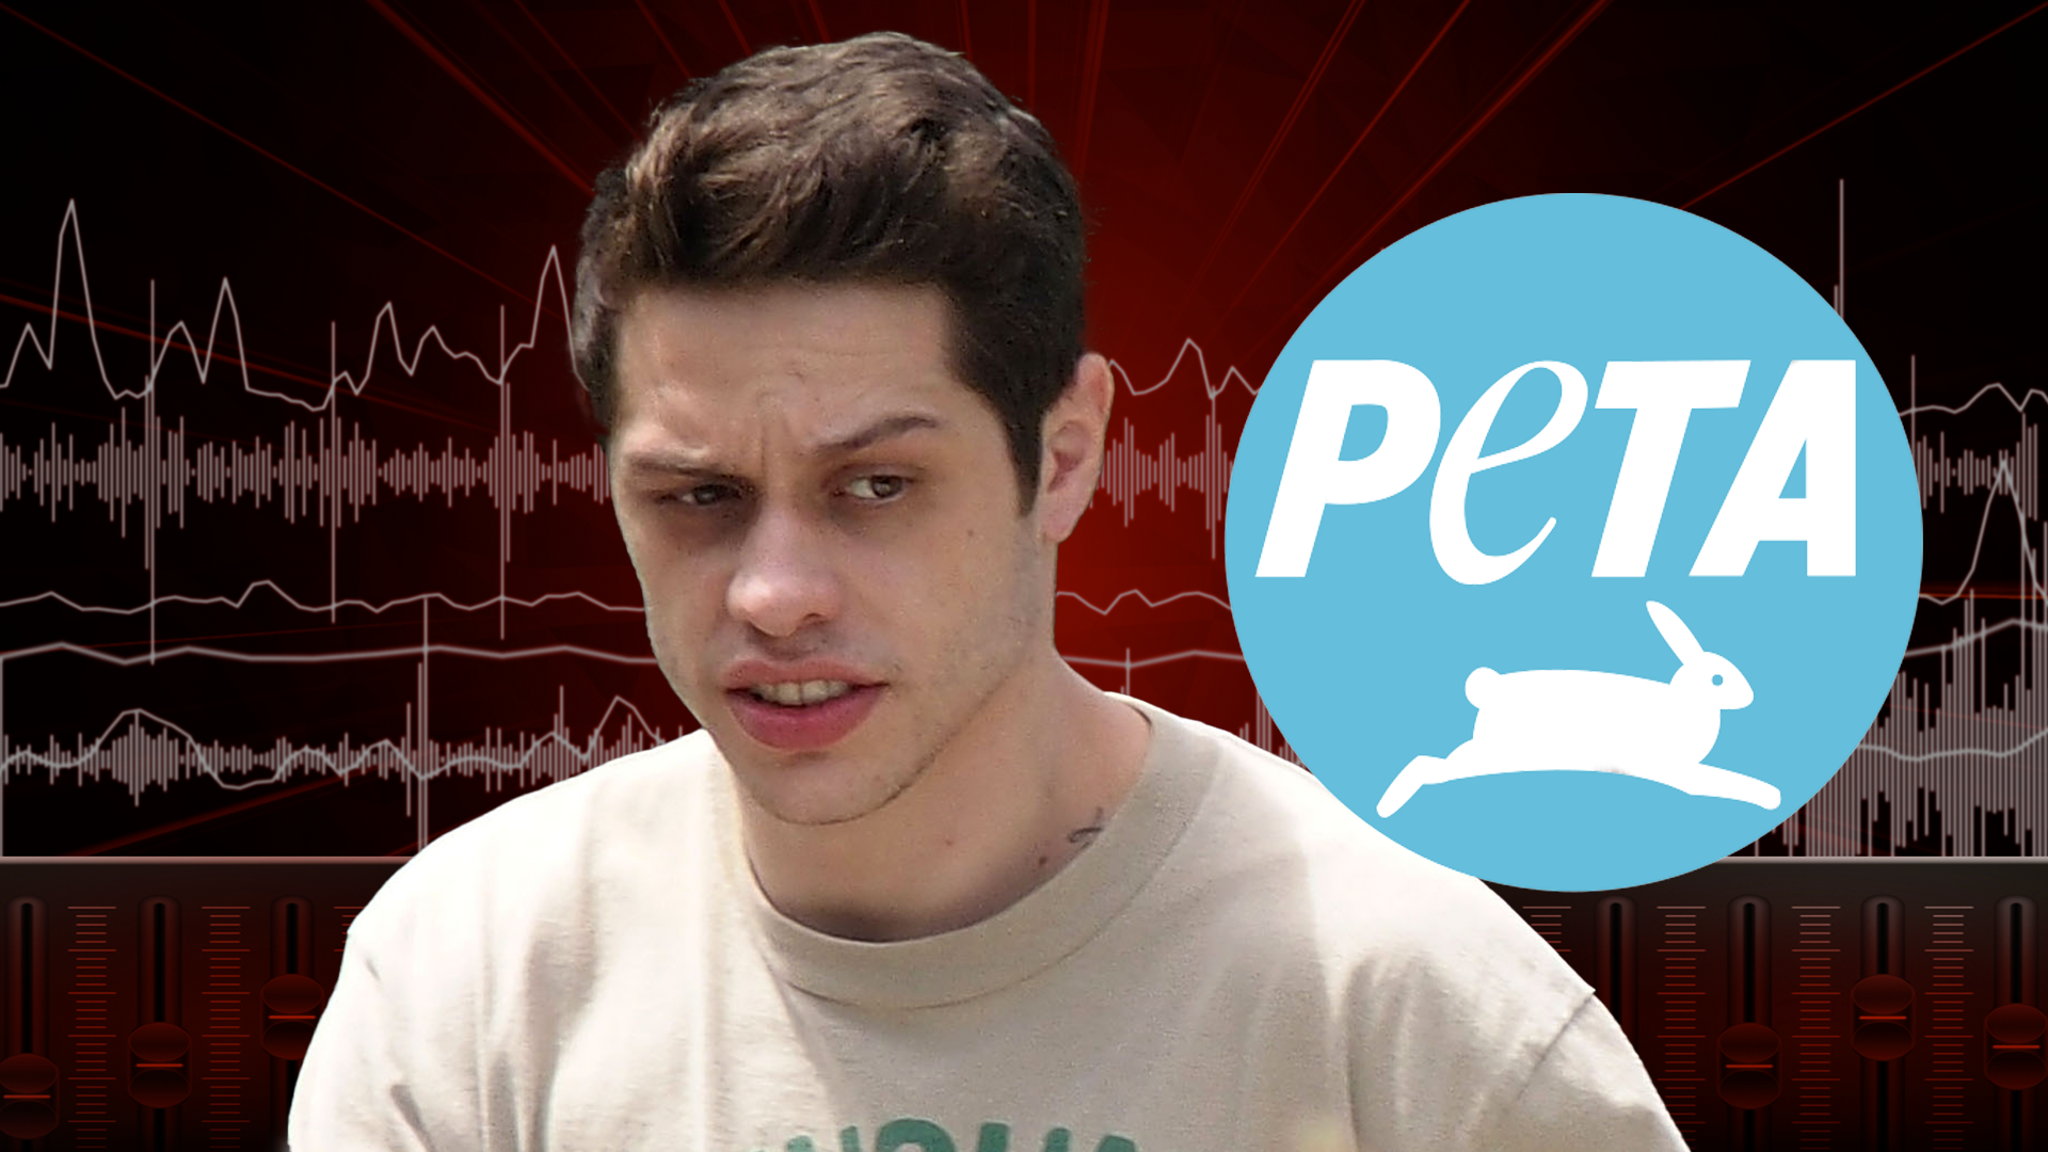 Pete Davidson Leaves PETA Unhinged Voice Mail in Response to Dog Flak